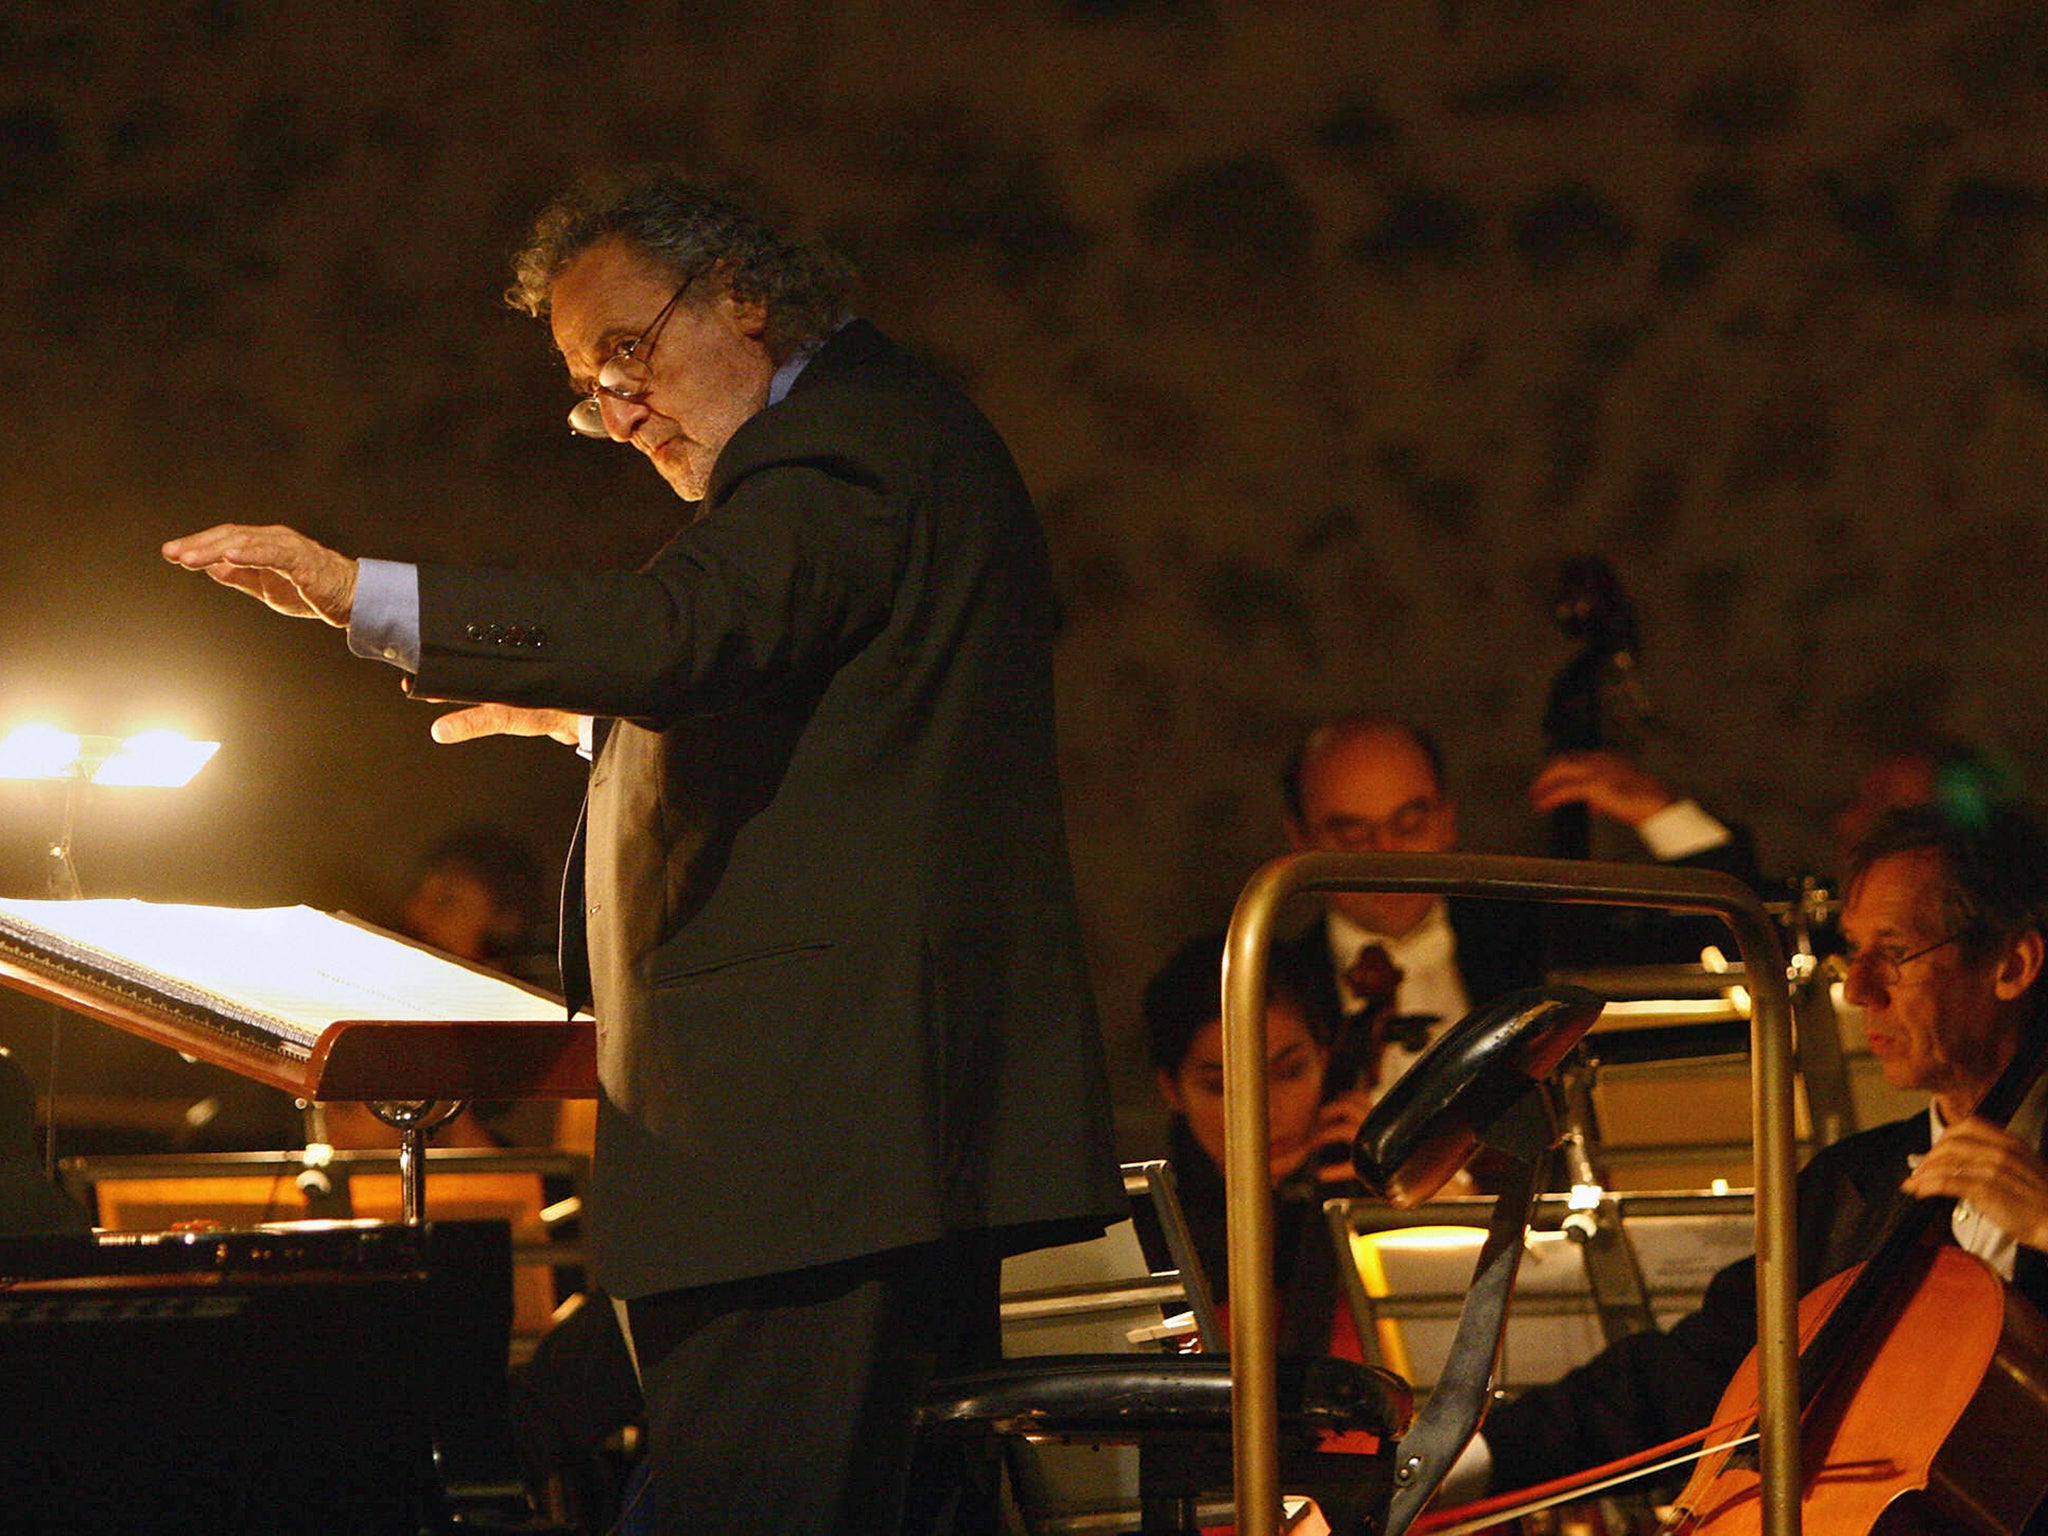 Bacalov, conducting at a Lisbon film music festival in 2006, continued composing into his eighties